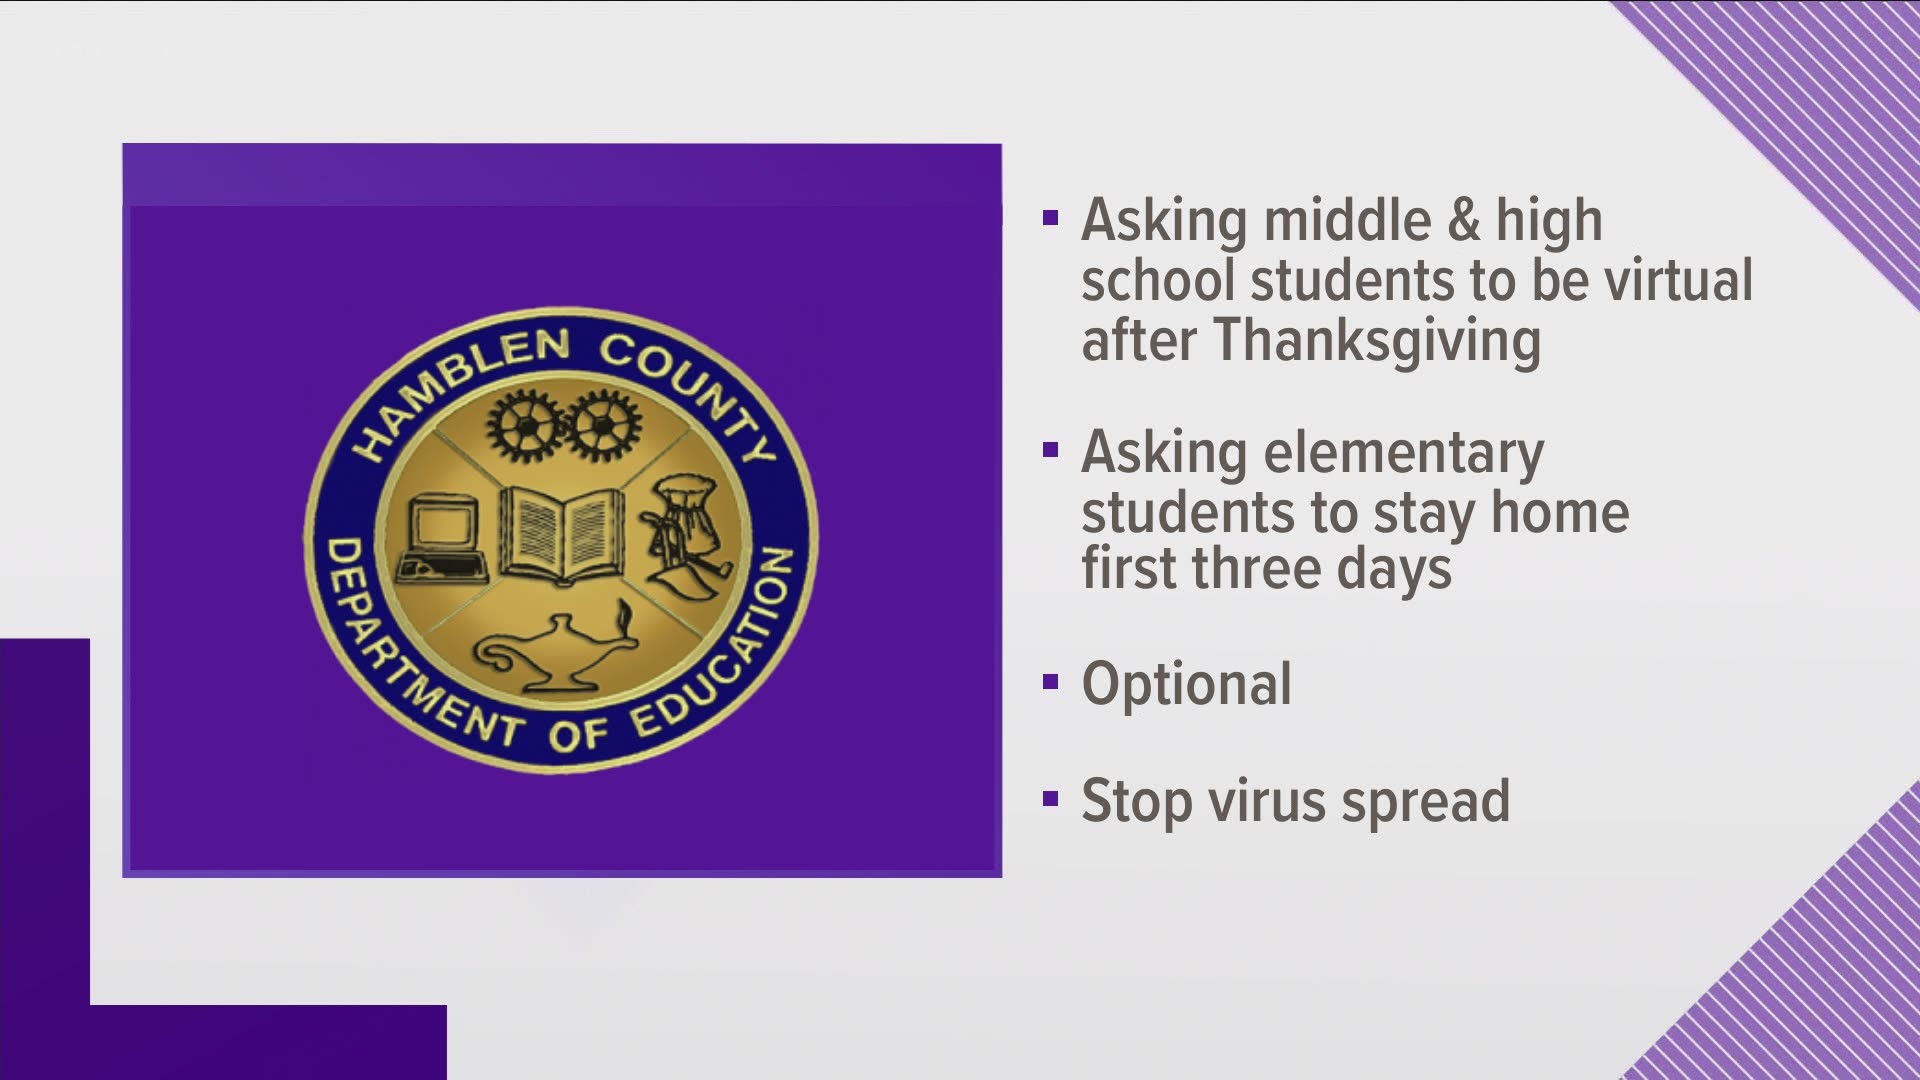 Hamblen County Schools is asking all middle and high school students to learn virtually if they can, the week after Thanksgiving.